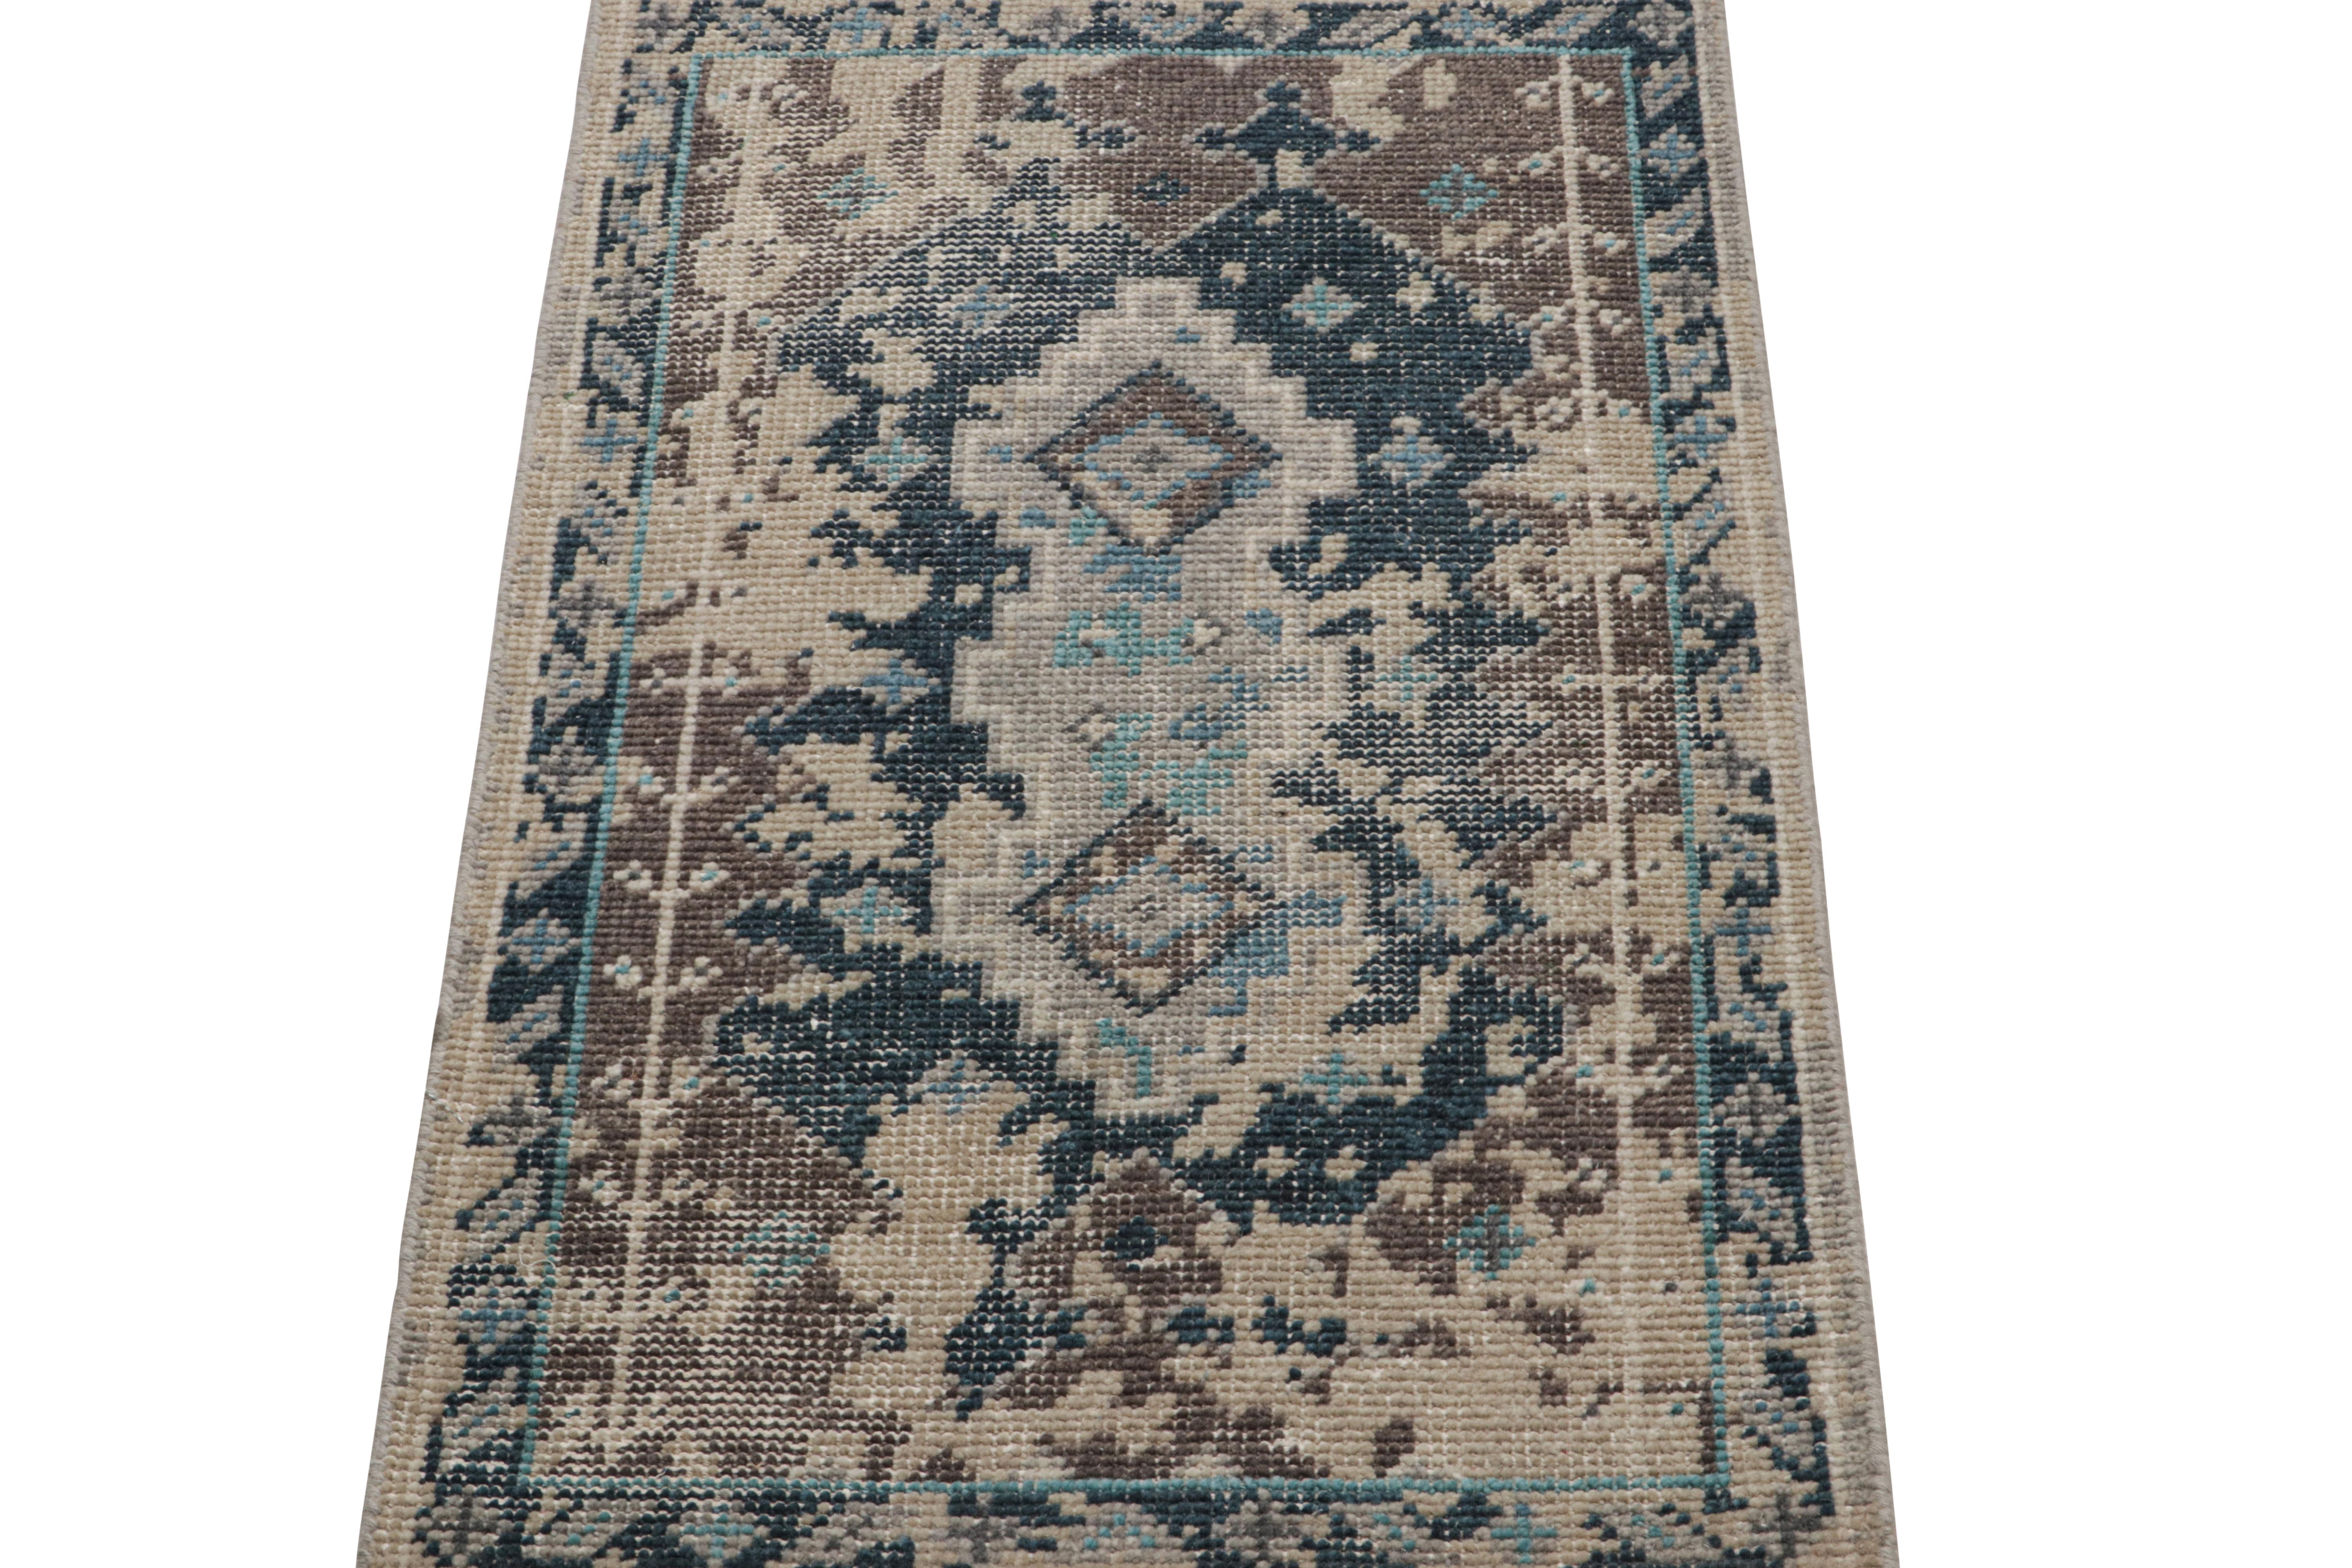 Hand-knotted in wool, this 2x3 rug from Rug & Kilim boasts an abstract approach to classic rug designs. 

On the Design: 

This design is a homage to art via abstract impressionist moods. The pattern boasts dark blue and brown underscoring geometric